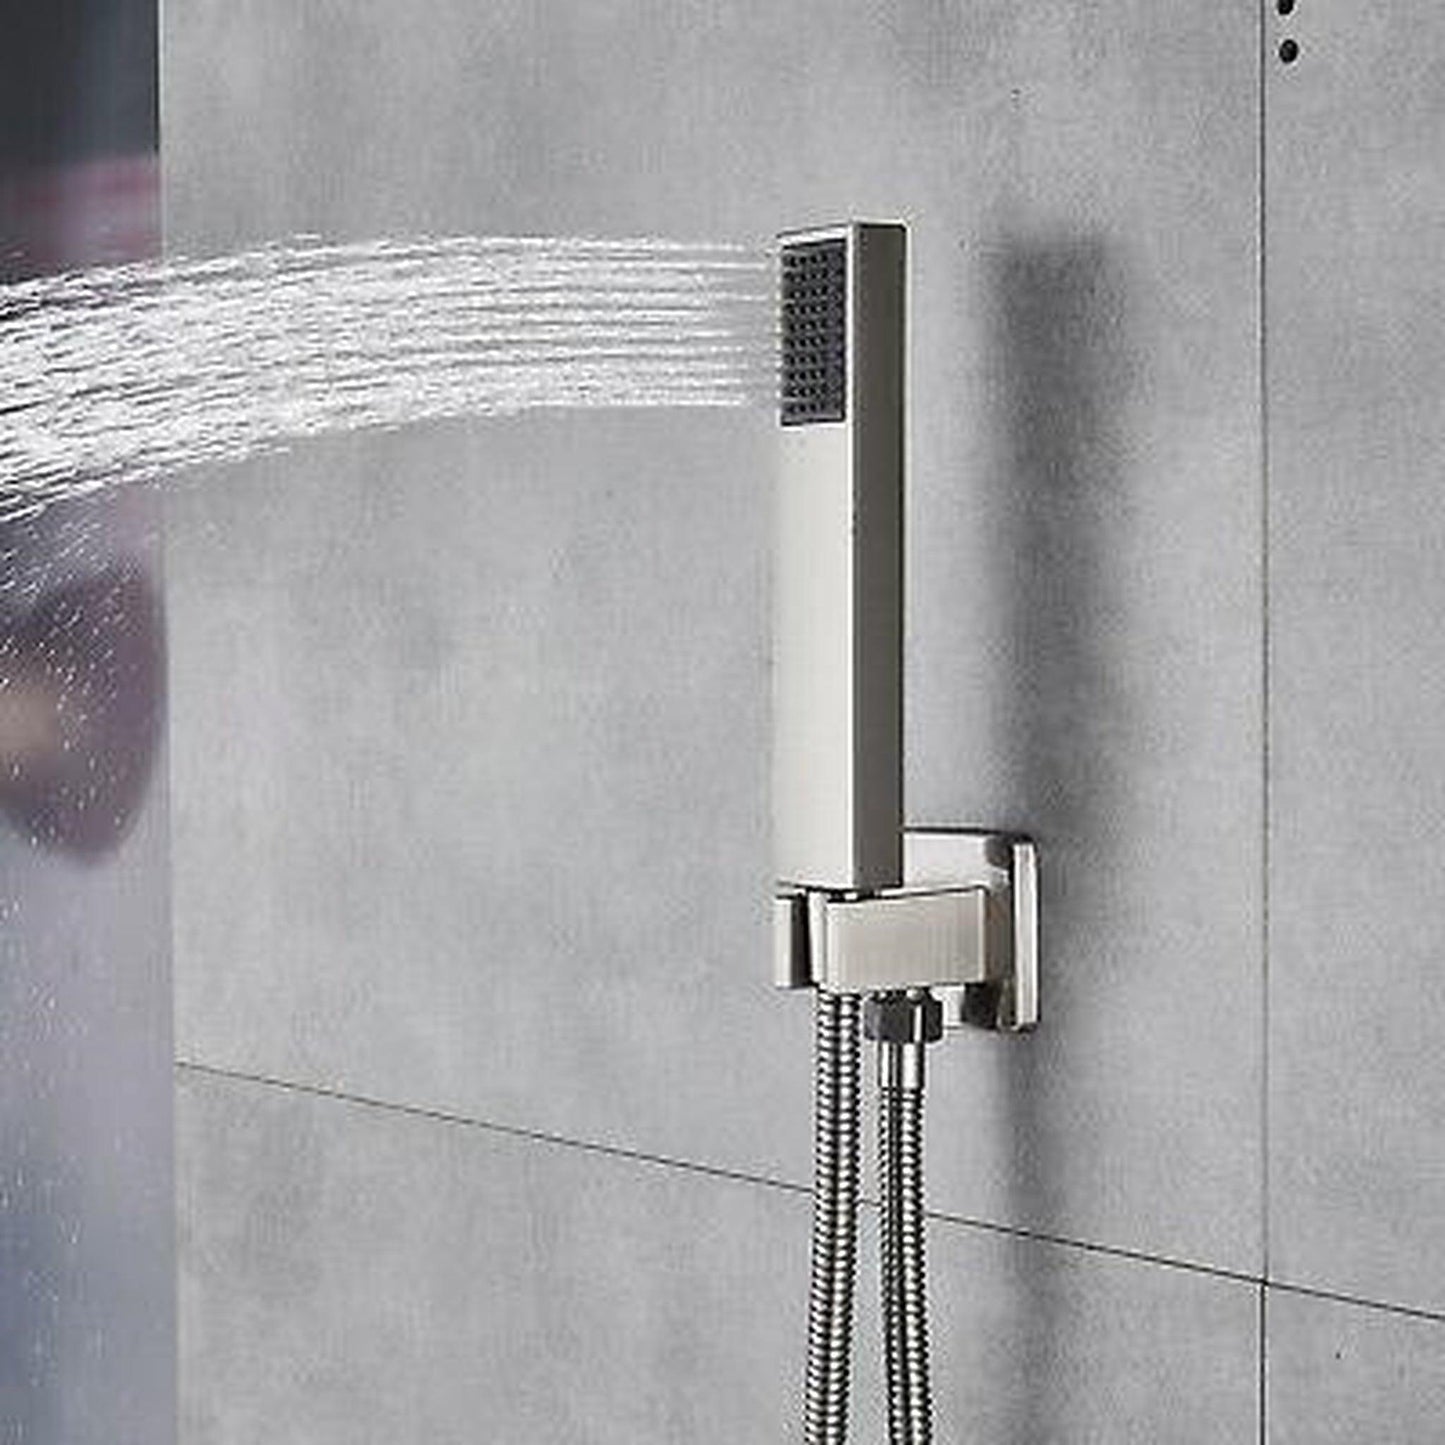 Fontana Monro 8" Chrome Square Wall-Mounted LED Shower Set With Multi-Level Mixer and Hand Shower